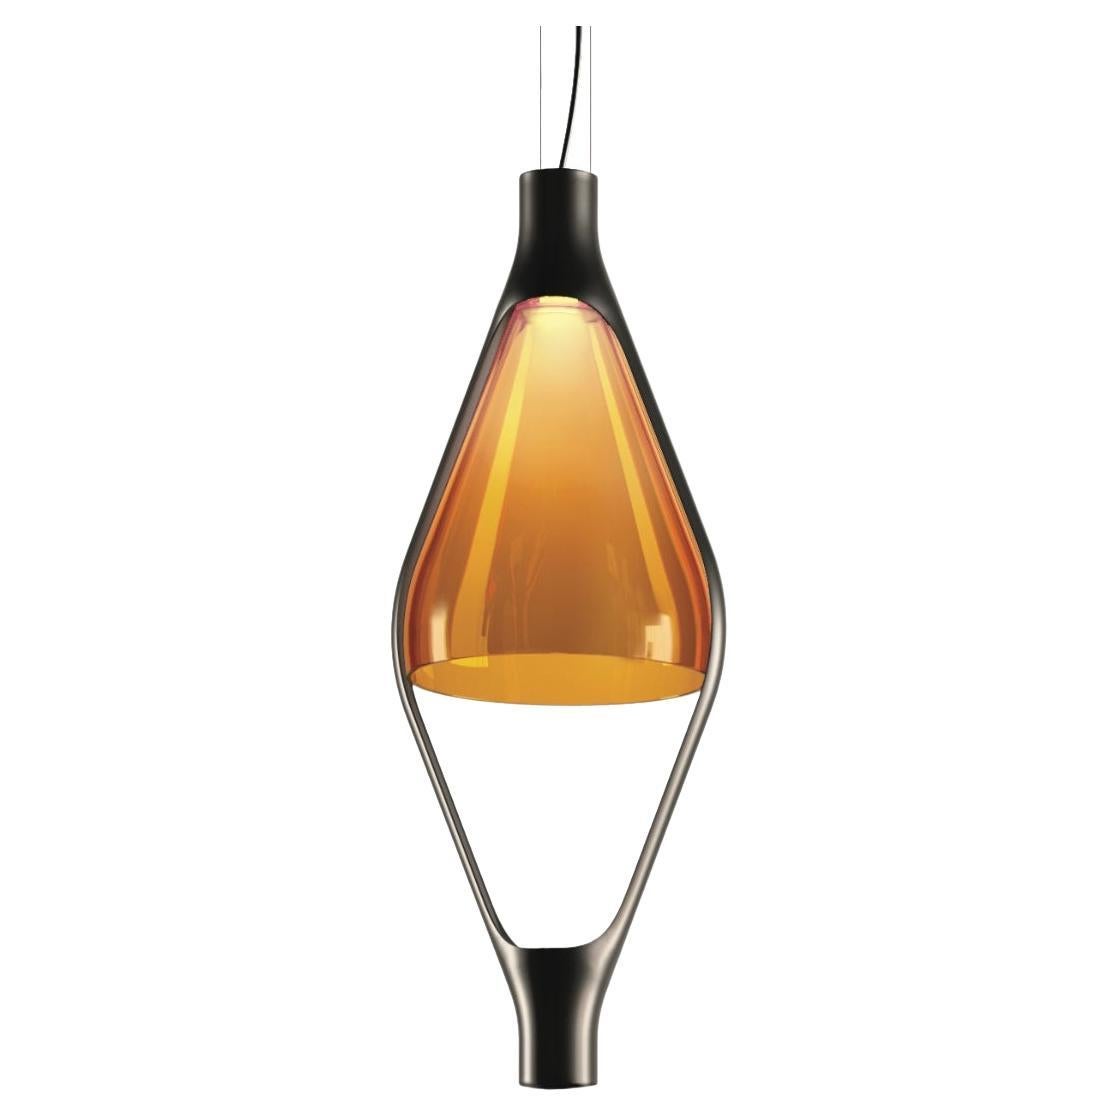 Metal 'Viceversa' Modular Suspension Lamp by Noé Lawrance for Kdln in Amber For Sale